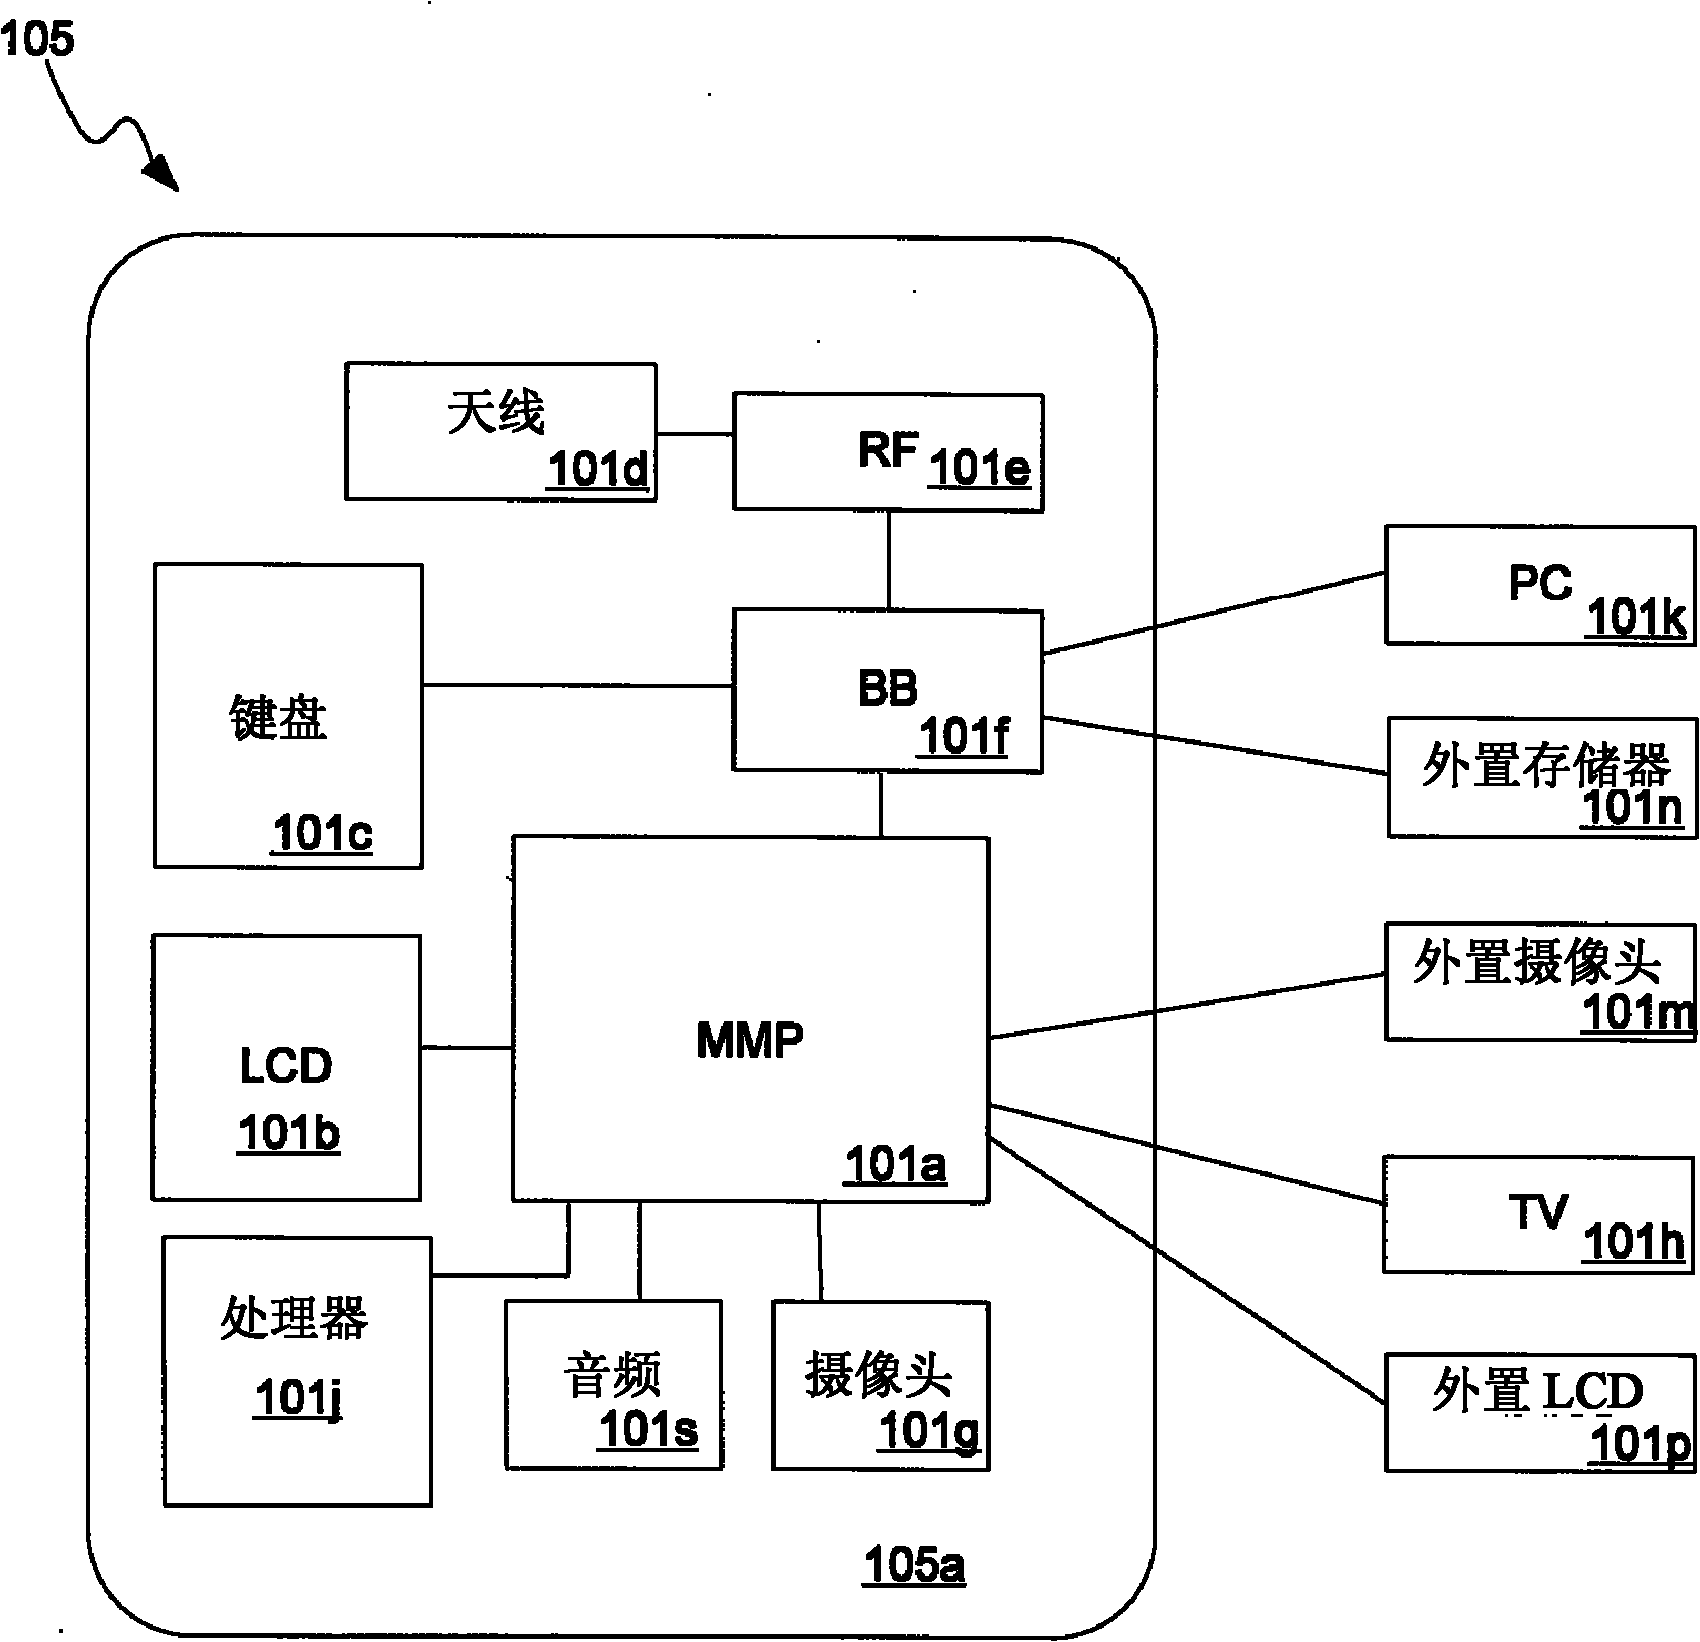 Method and system for video processing